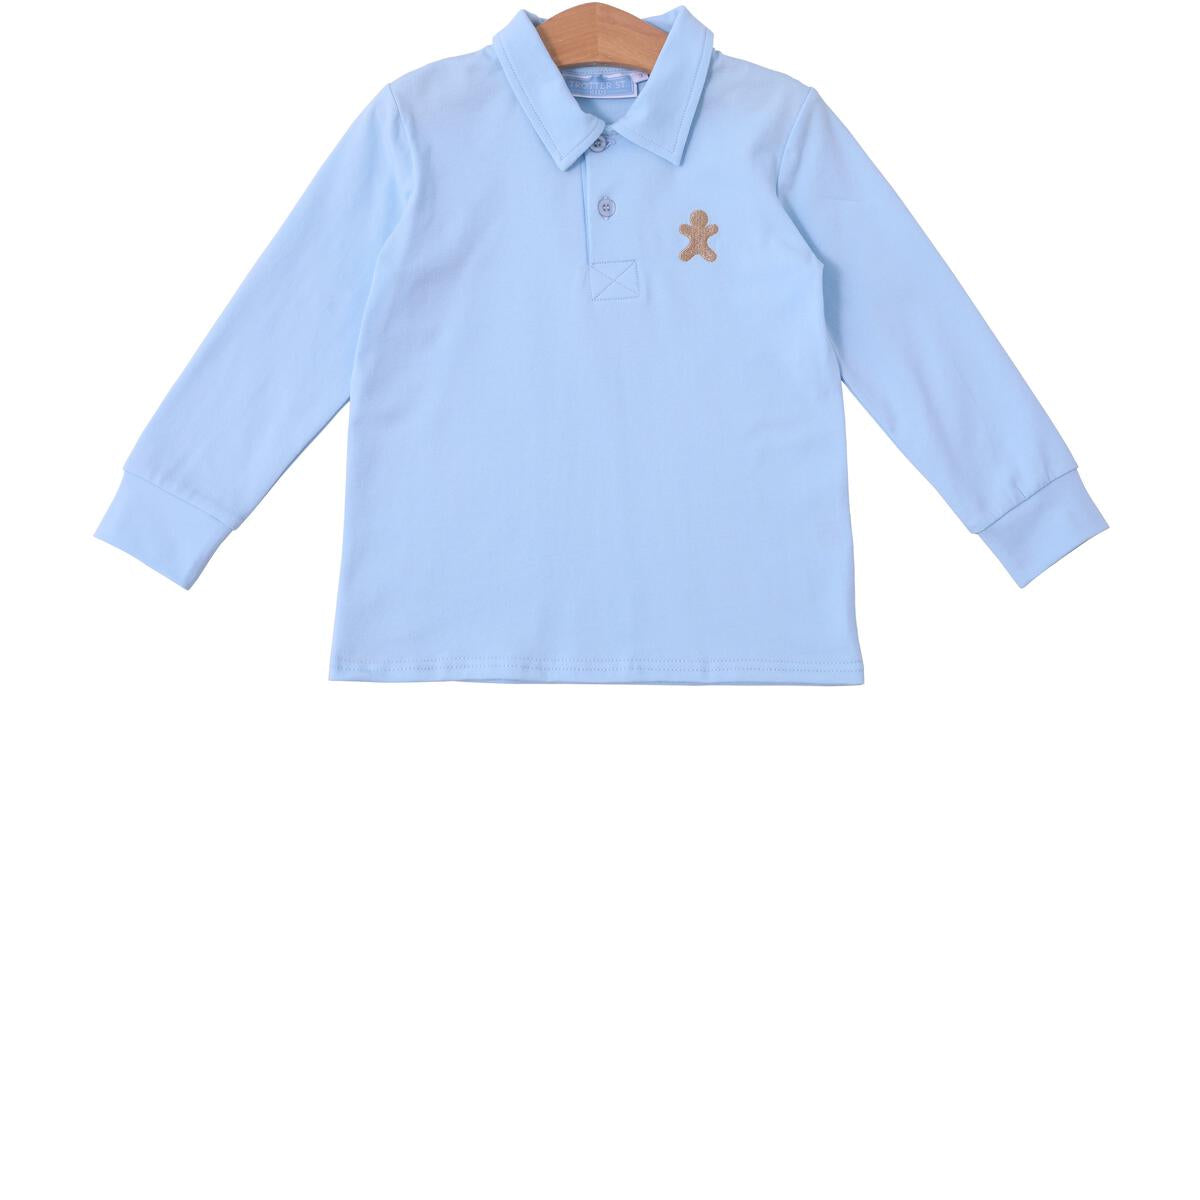 Trotter Street Kids Gingerbread Embroidery Polo